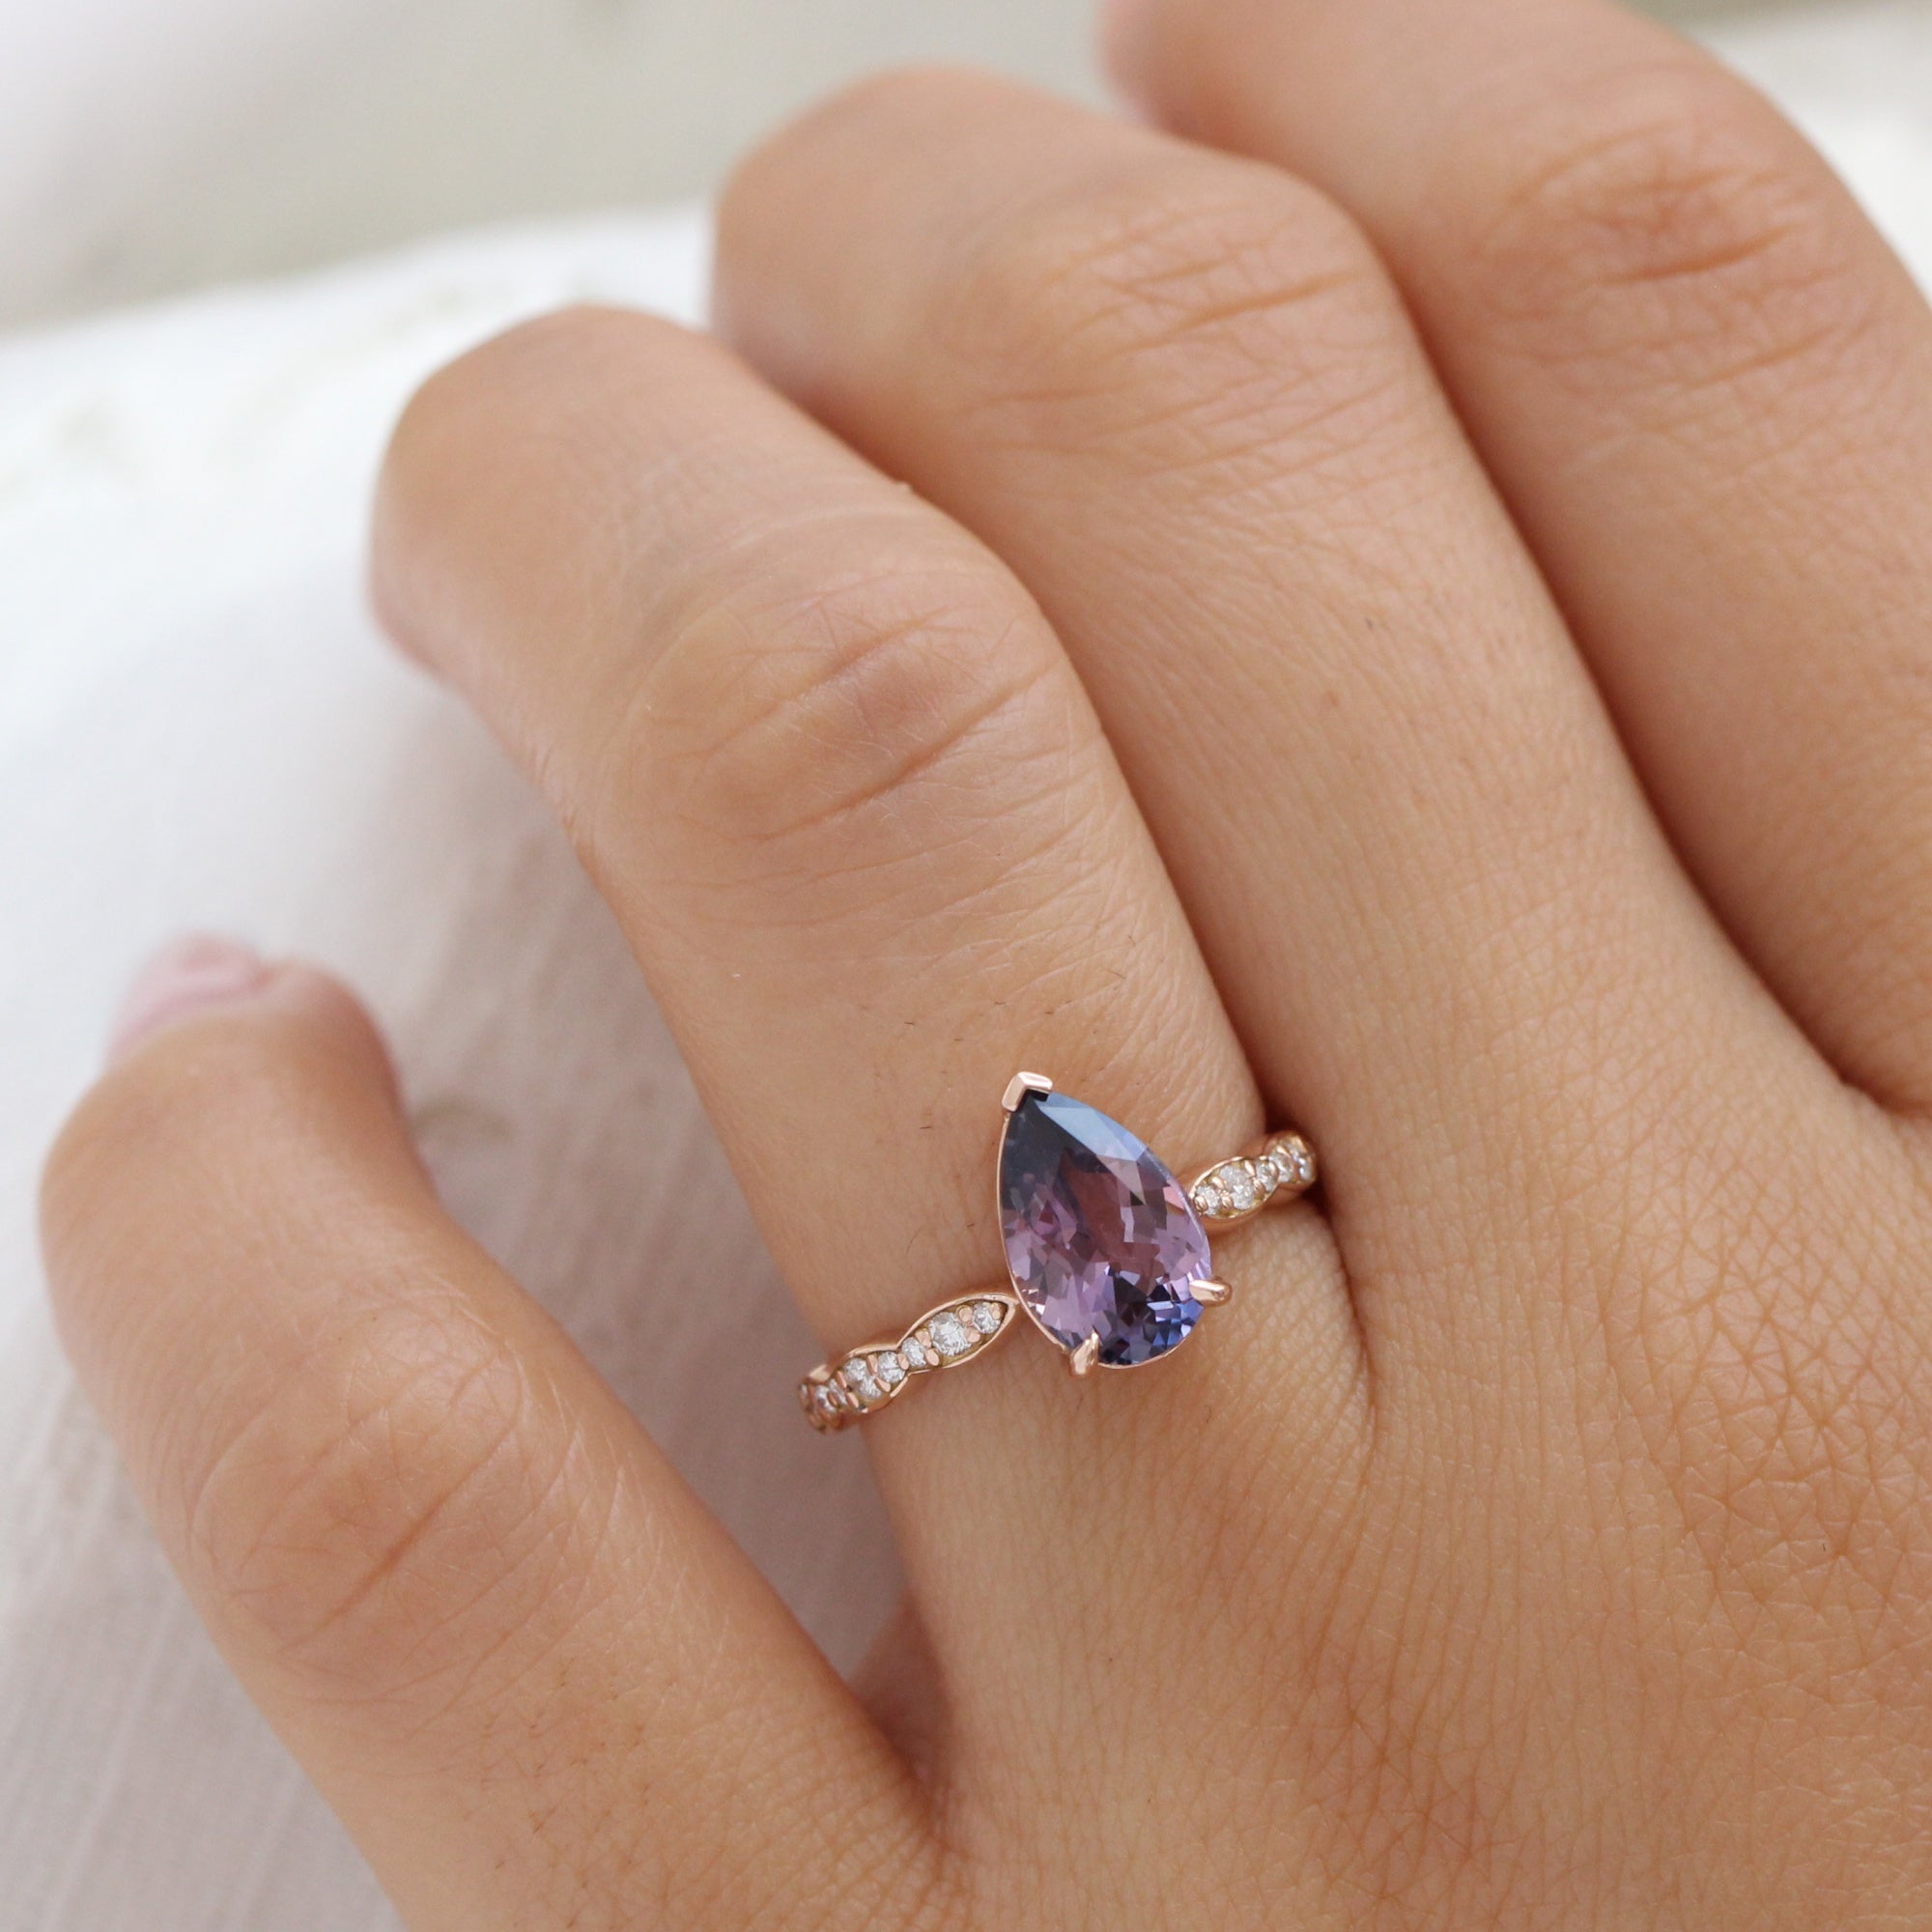 Rare blue and purple parti sapphire ring rose gold low set engagement ring la more design jewelry